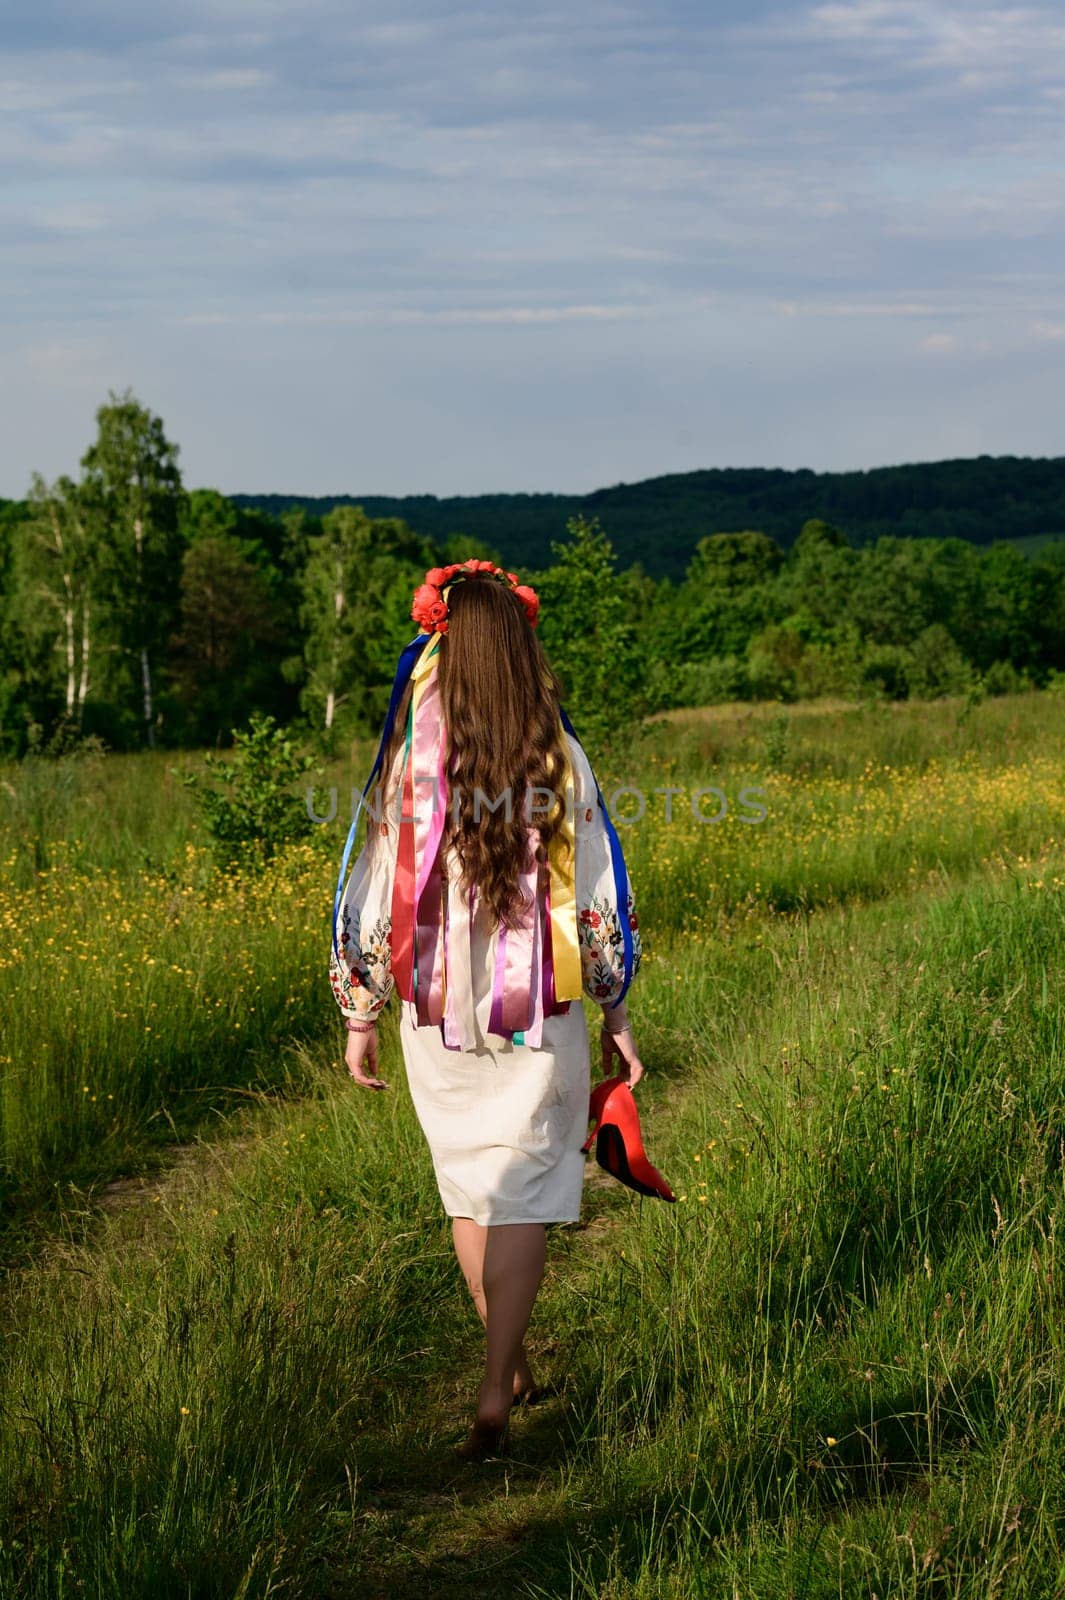 The girl, with her back turned and dressed in Ukrainian national clothes, walks barefoot in the field. by Niko_Cingaryuk